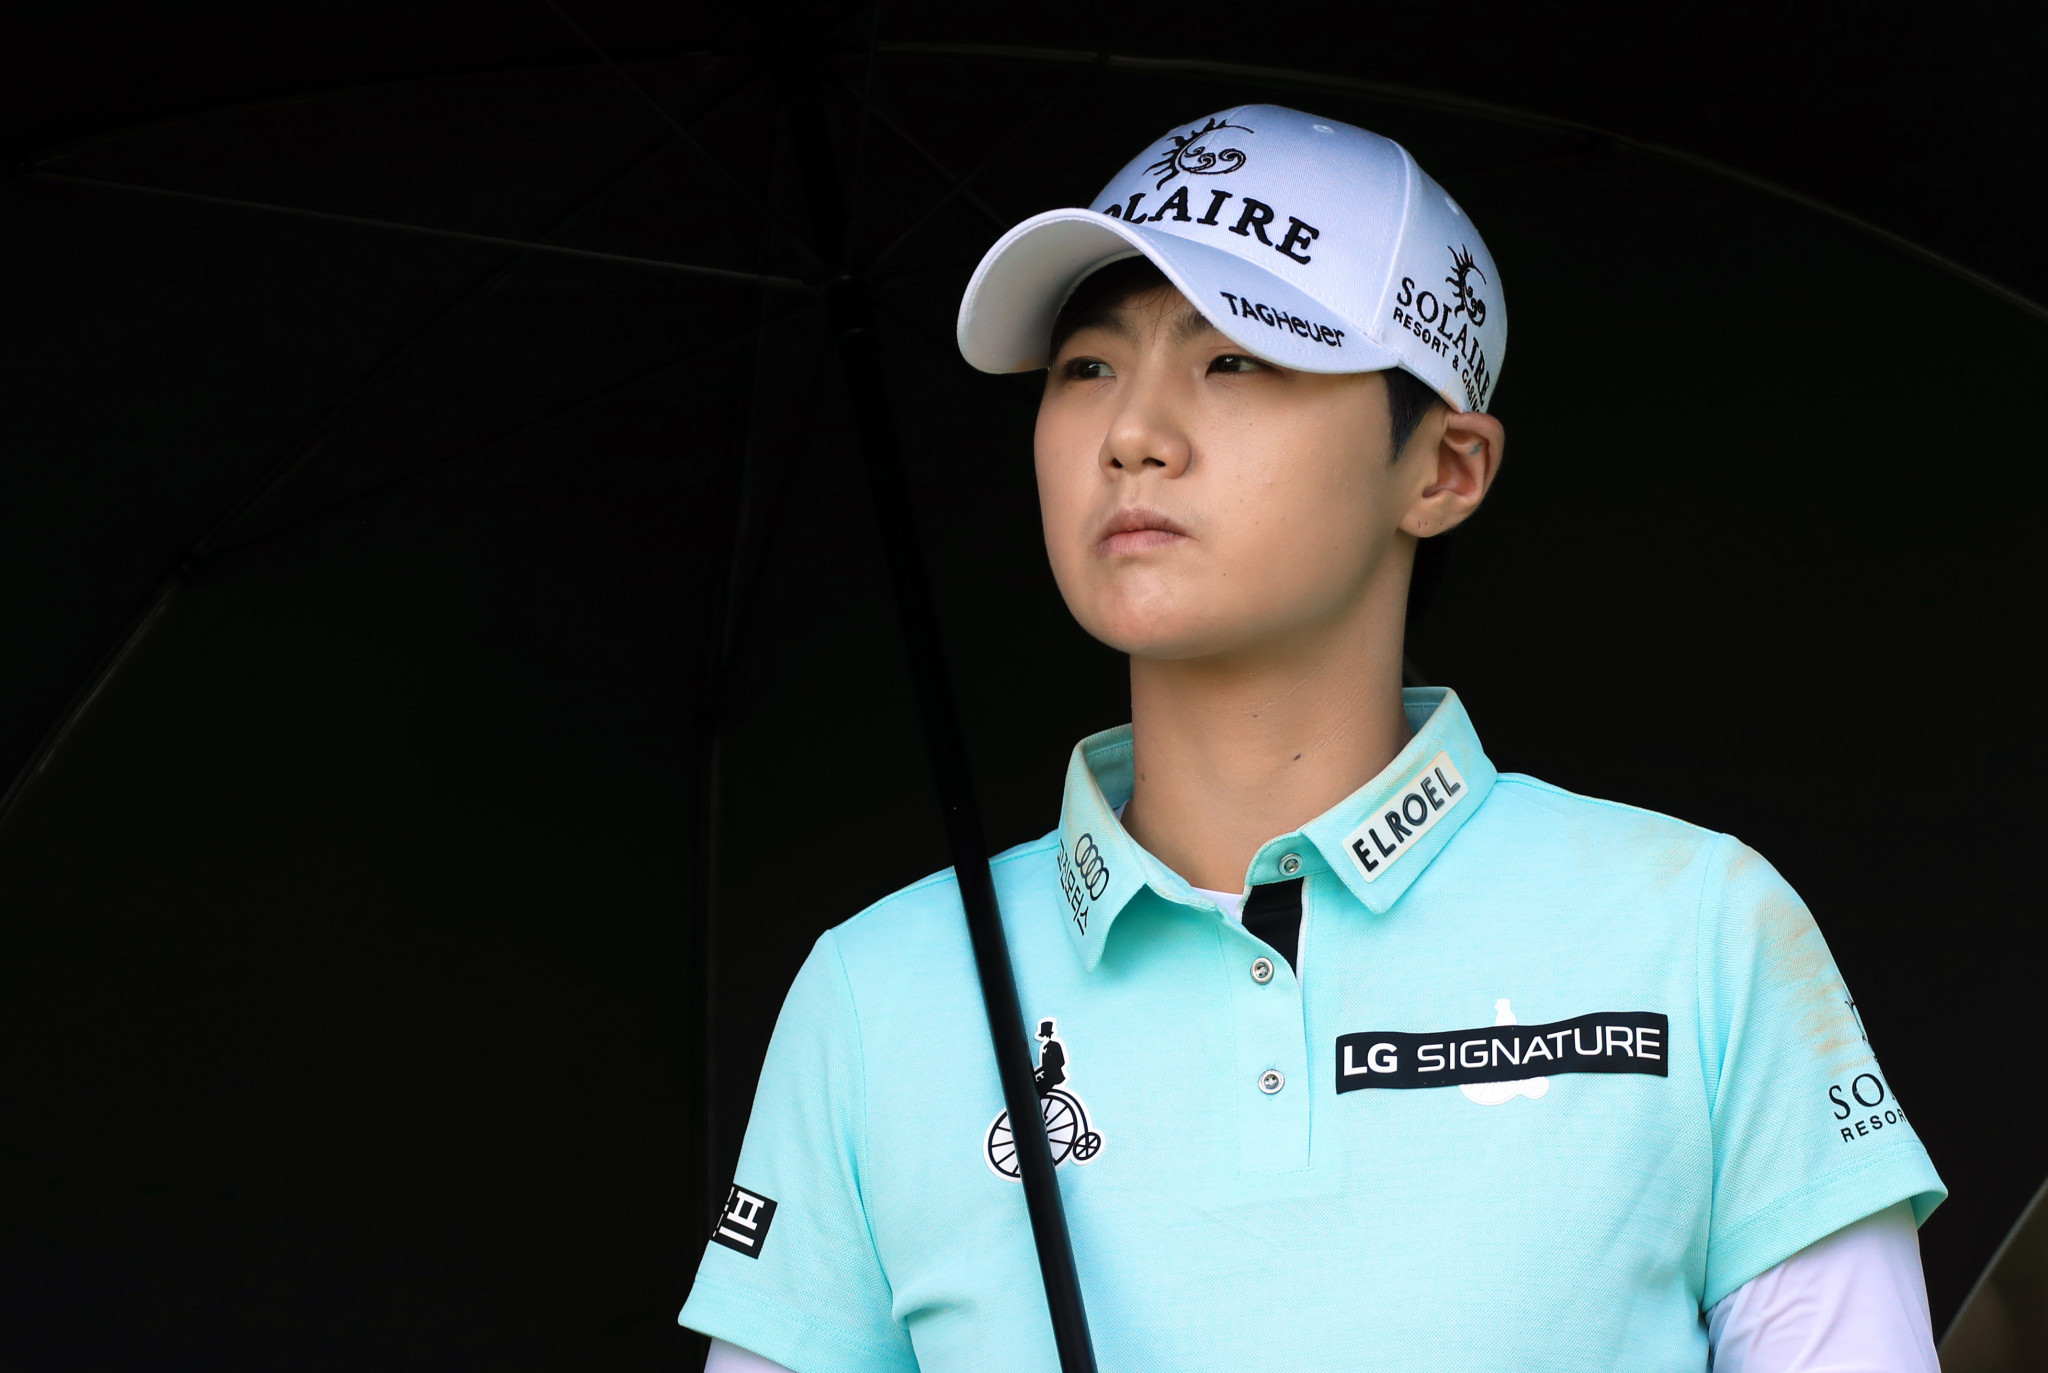 South Korea's Park Sun-hyun will aim to defend her Women's Professional Golf Association Championship title at Hazeltine National Golf Club ©Getty Images